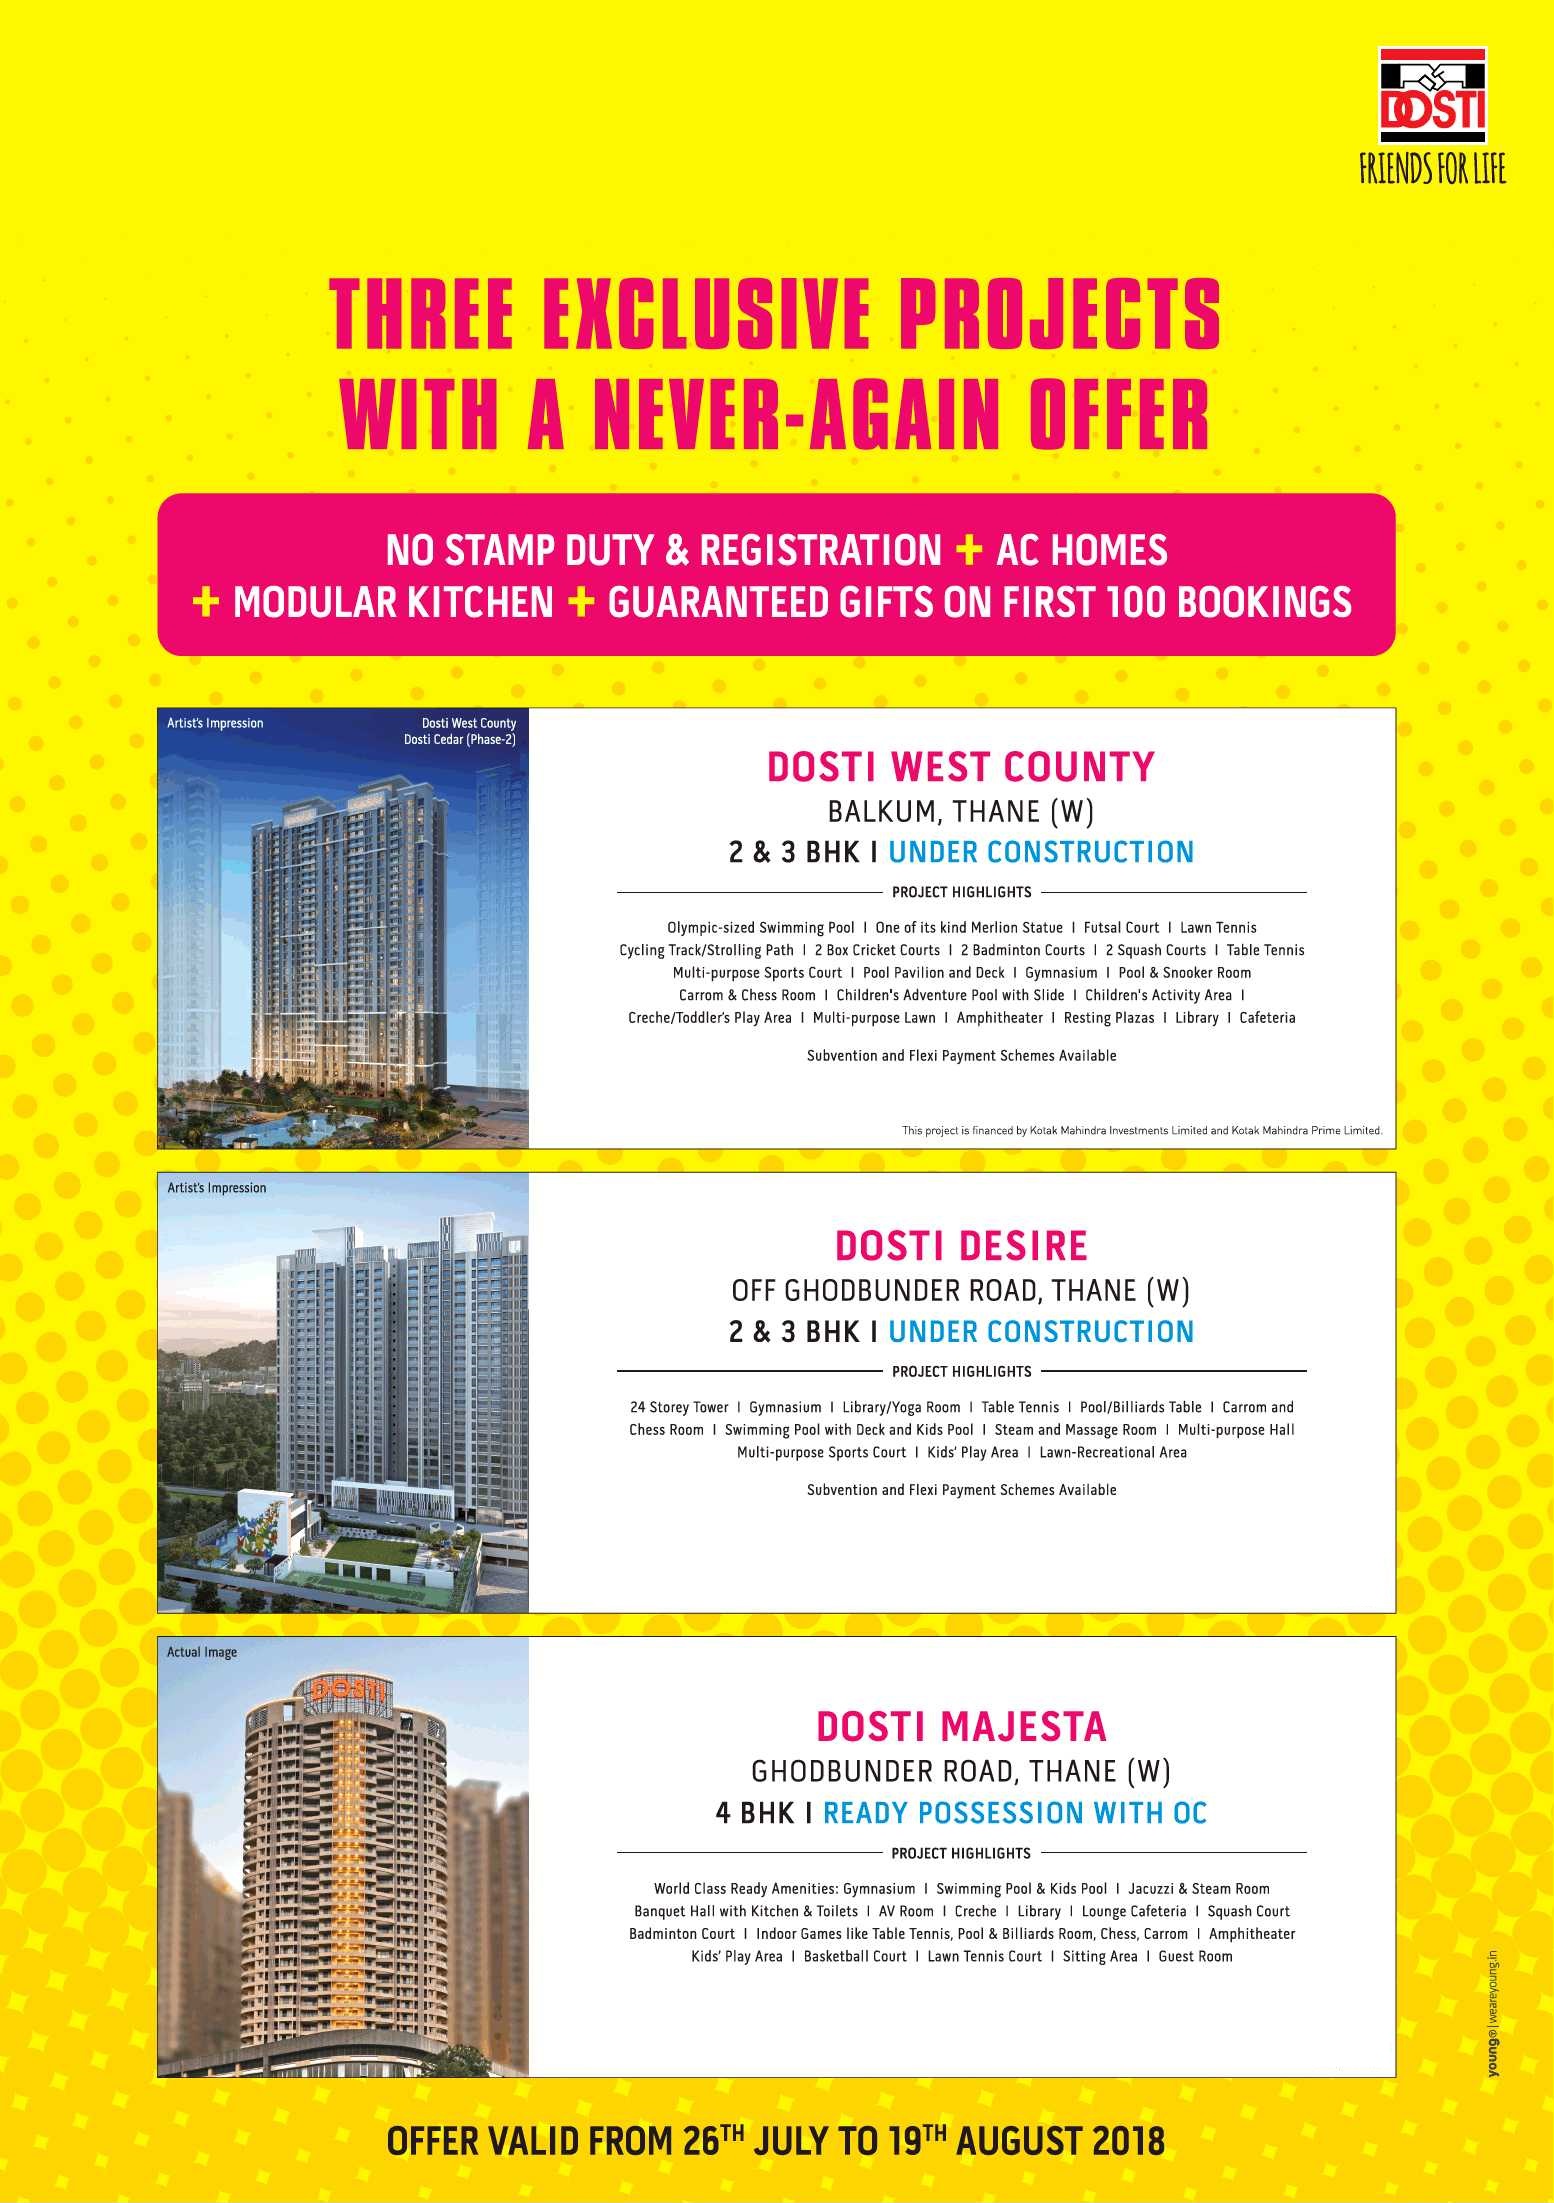 Dosti Reality introducing three exclusive projects with a never again offer in Mumbai Update